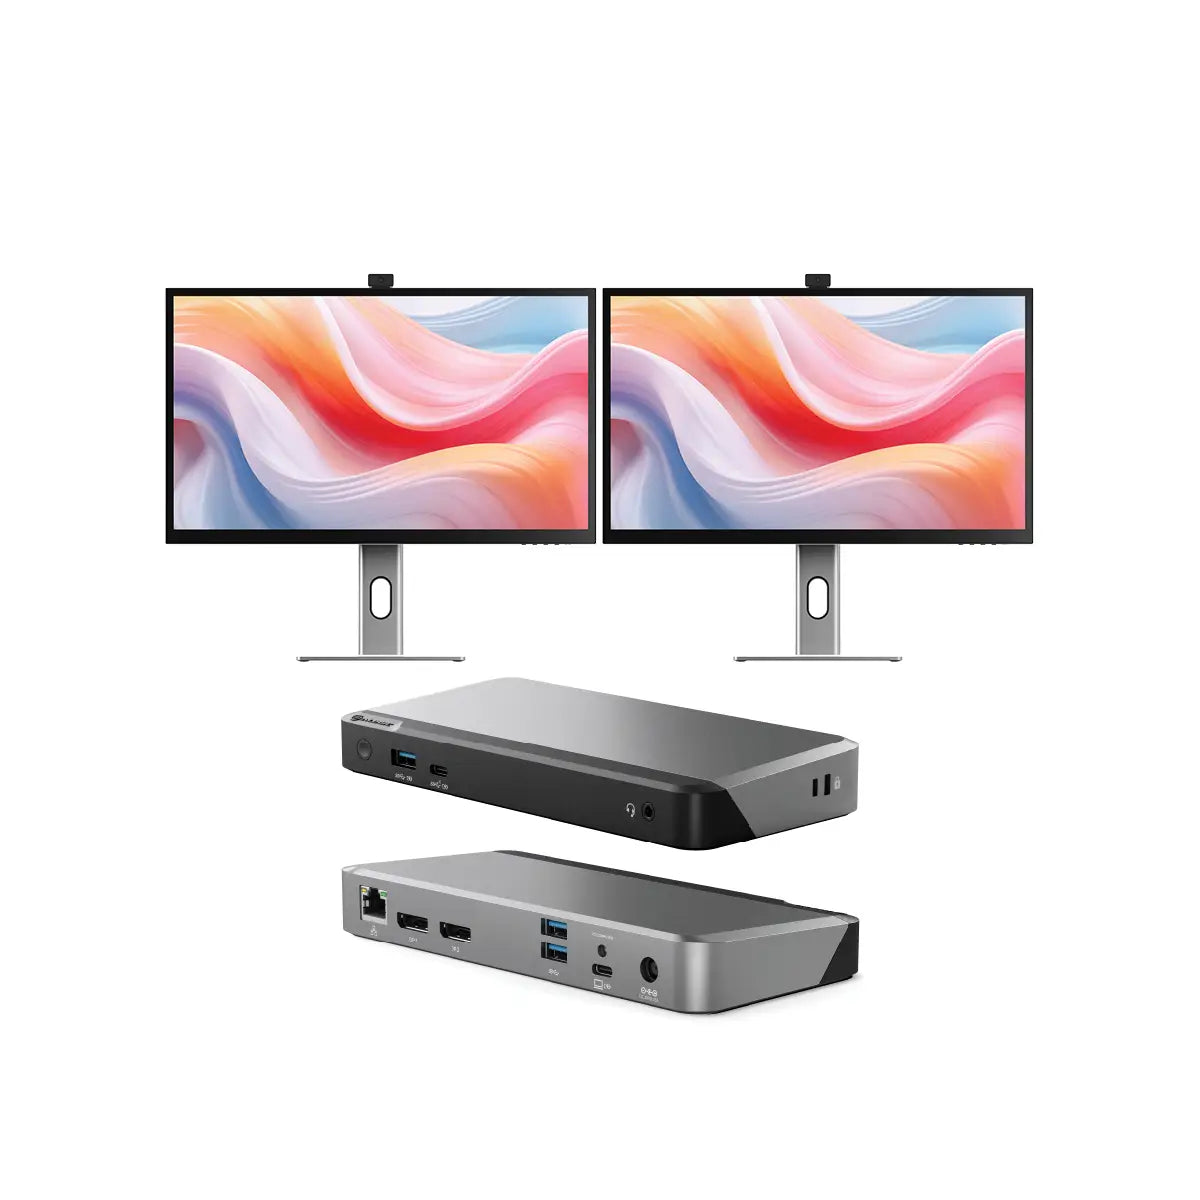 clarity-pro-27-uhd-4k-monitor-with-65w-pd-and-webcam-pack-of-2-dx2-dual-4k-display-universal-docking-station-with-65w-power-delivery_1